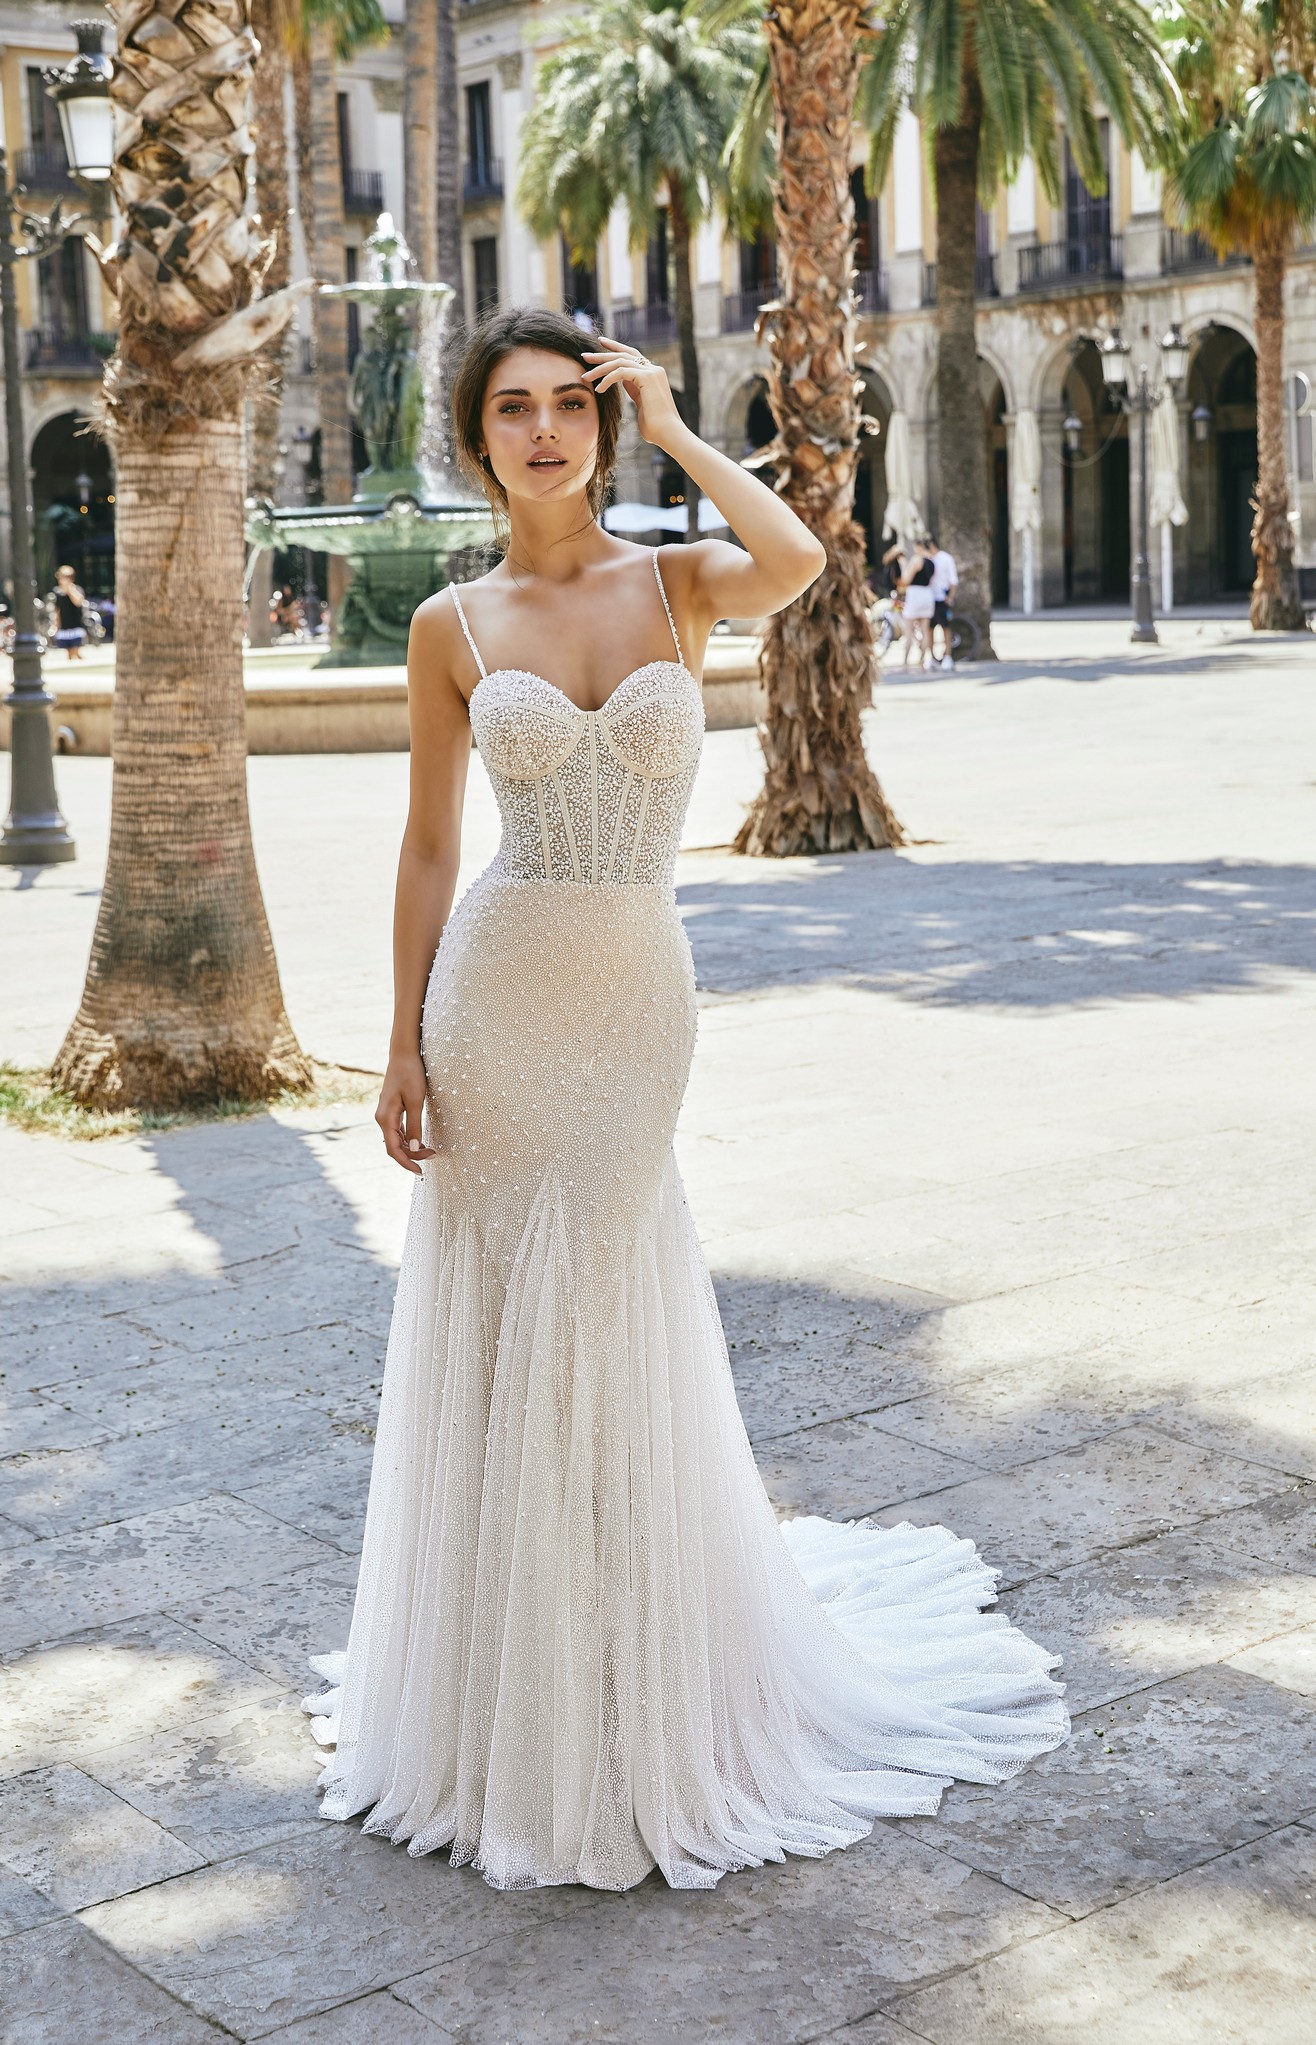 Brunette lady standing in Barcelona plaza wearing pearl beaded fit and flare wedding dress with spaghetti straps